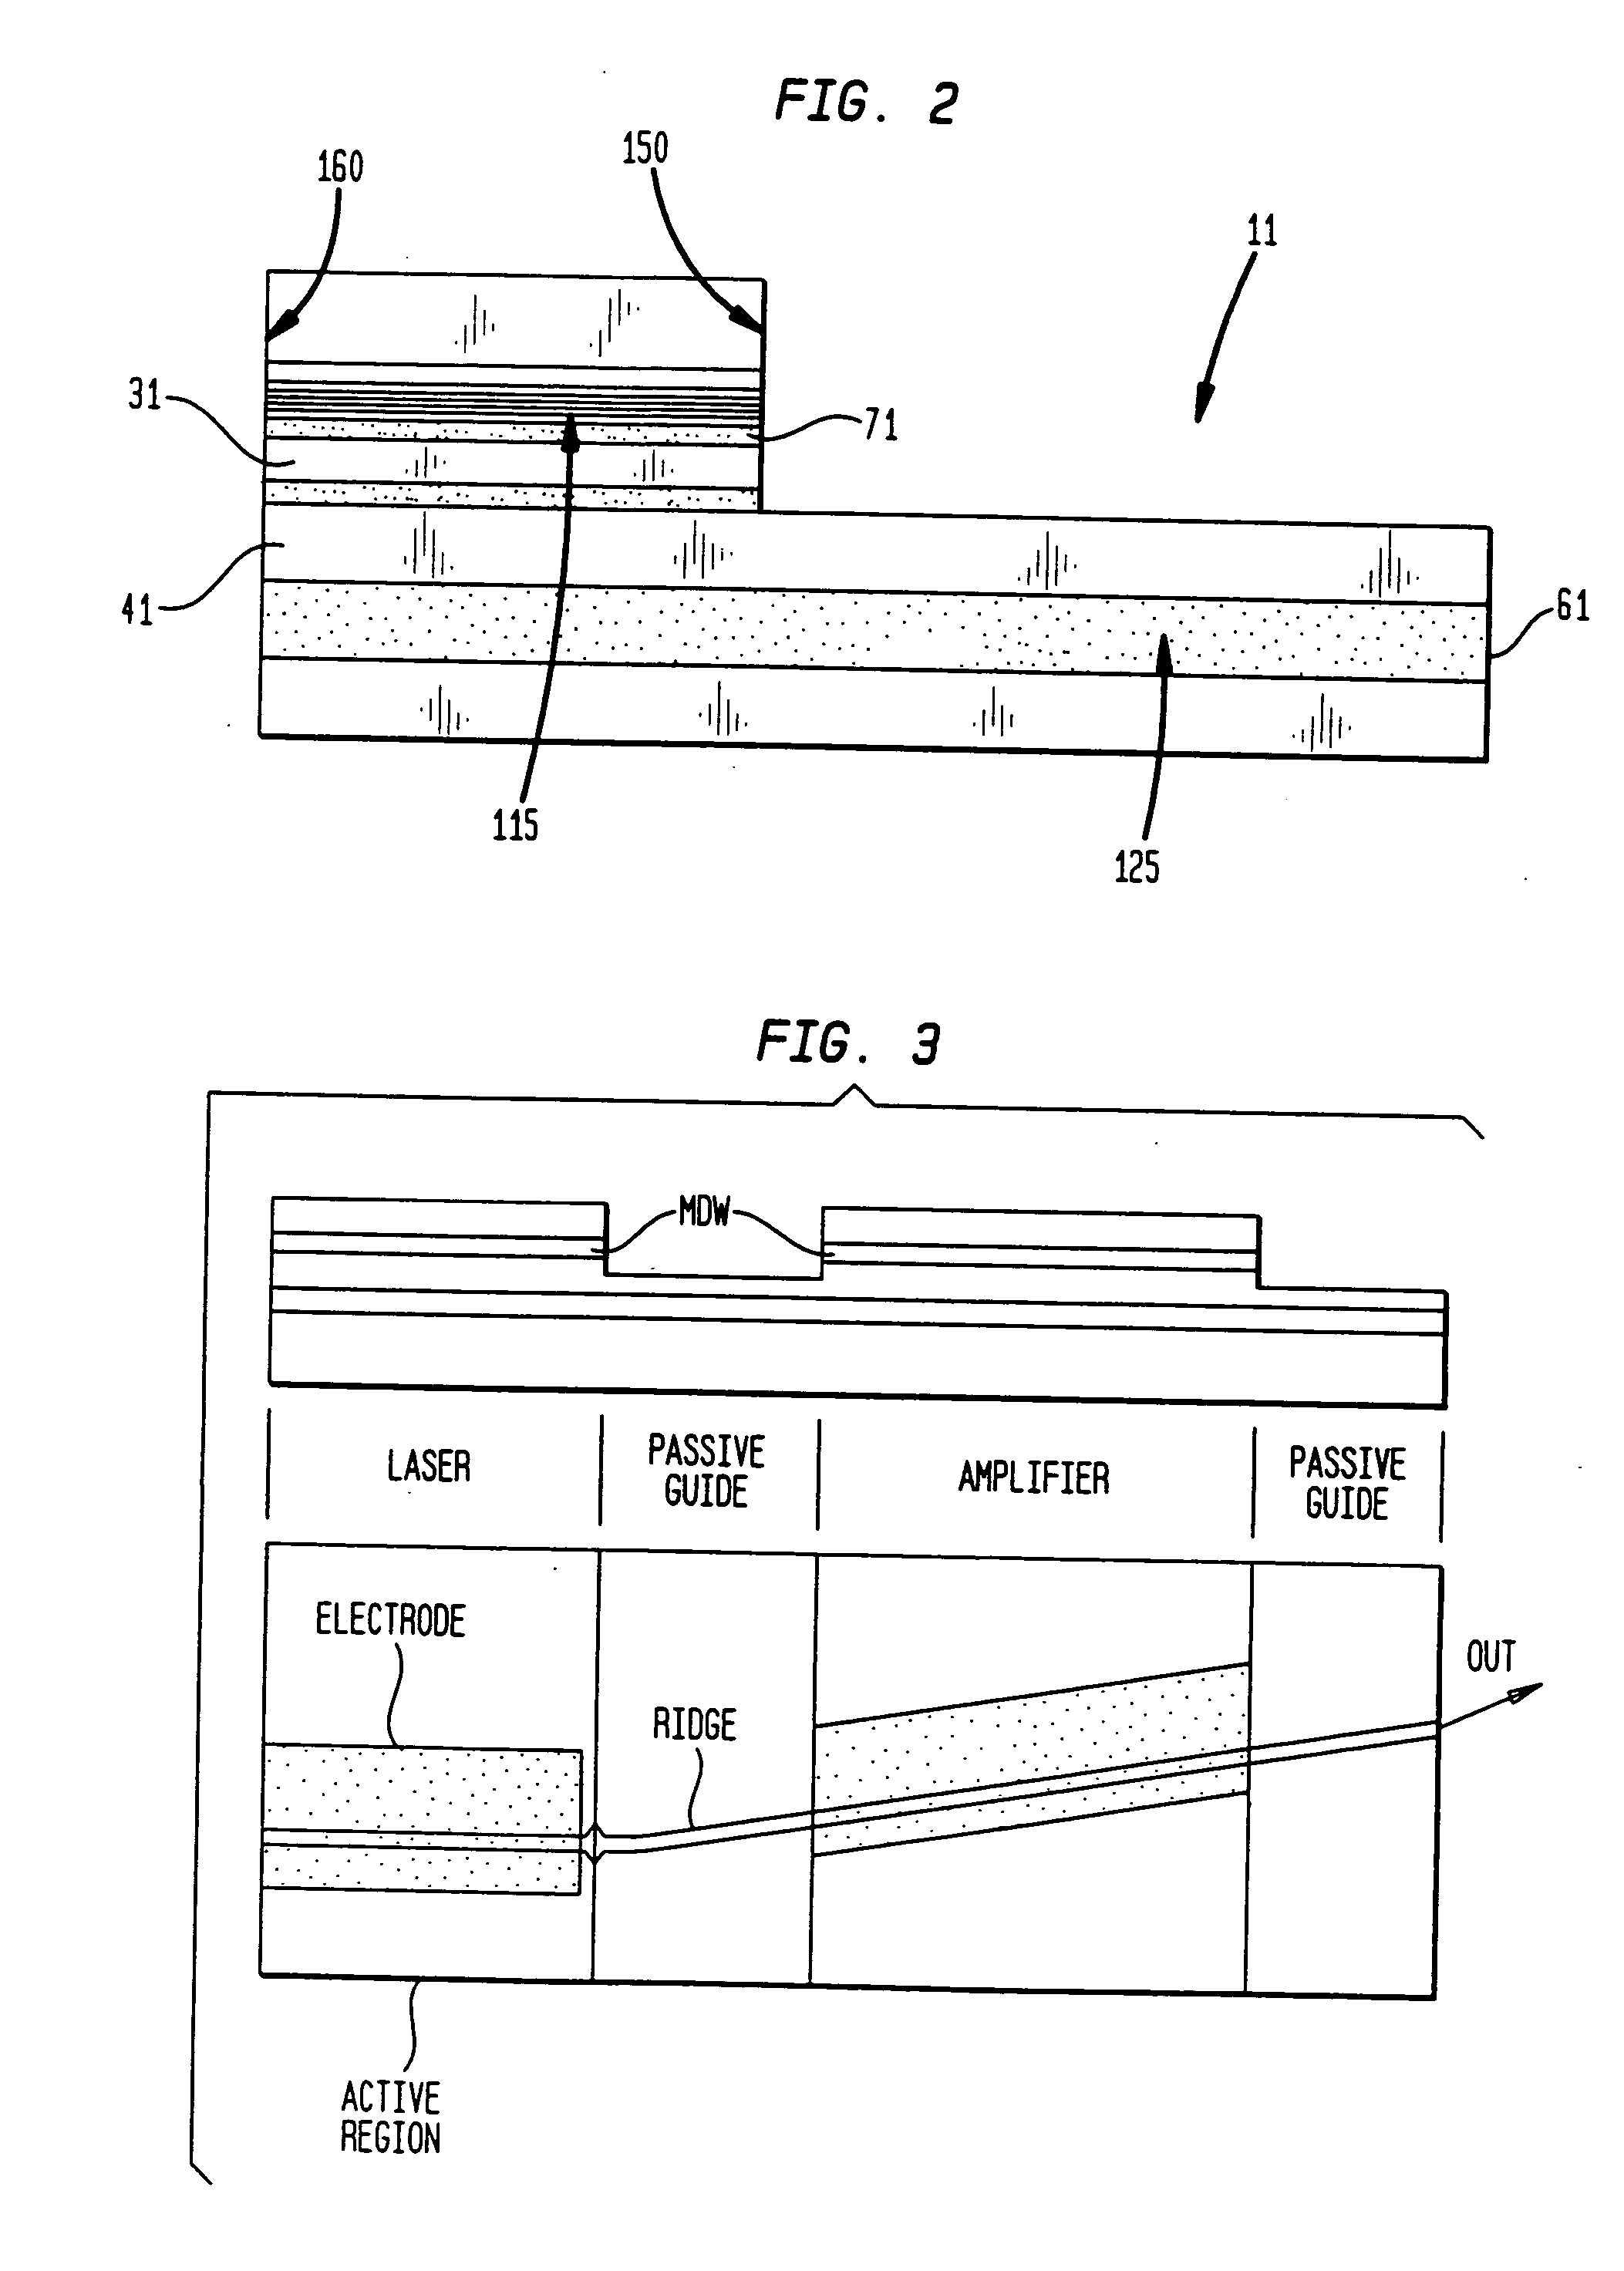 Twin waveguide based design for photonic integrated circuits